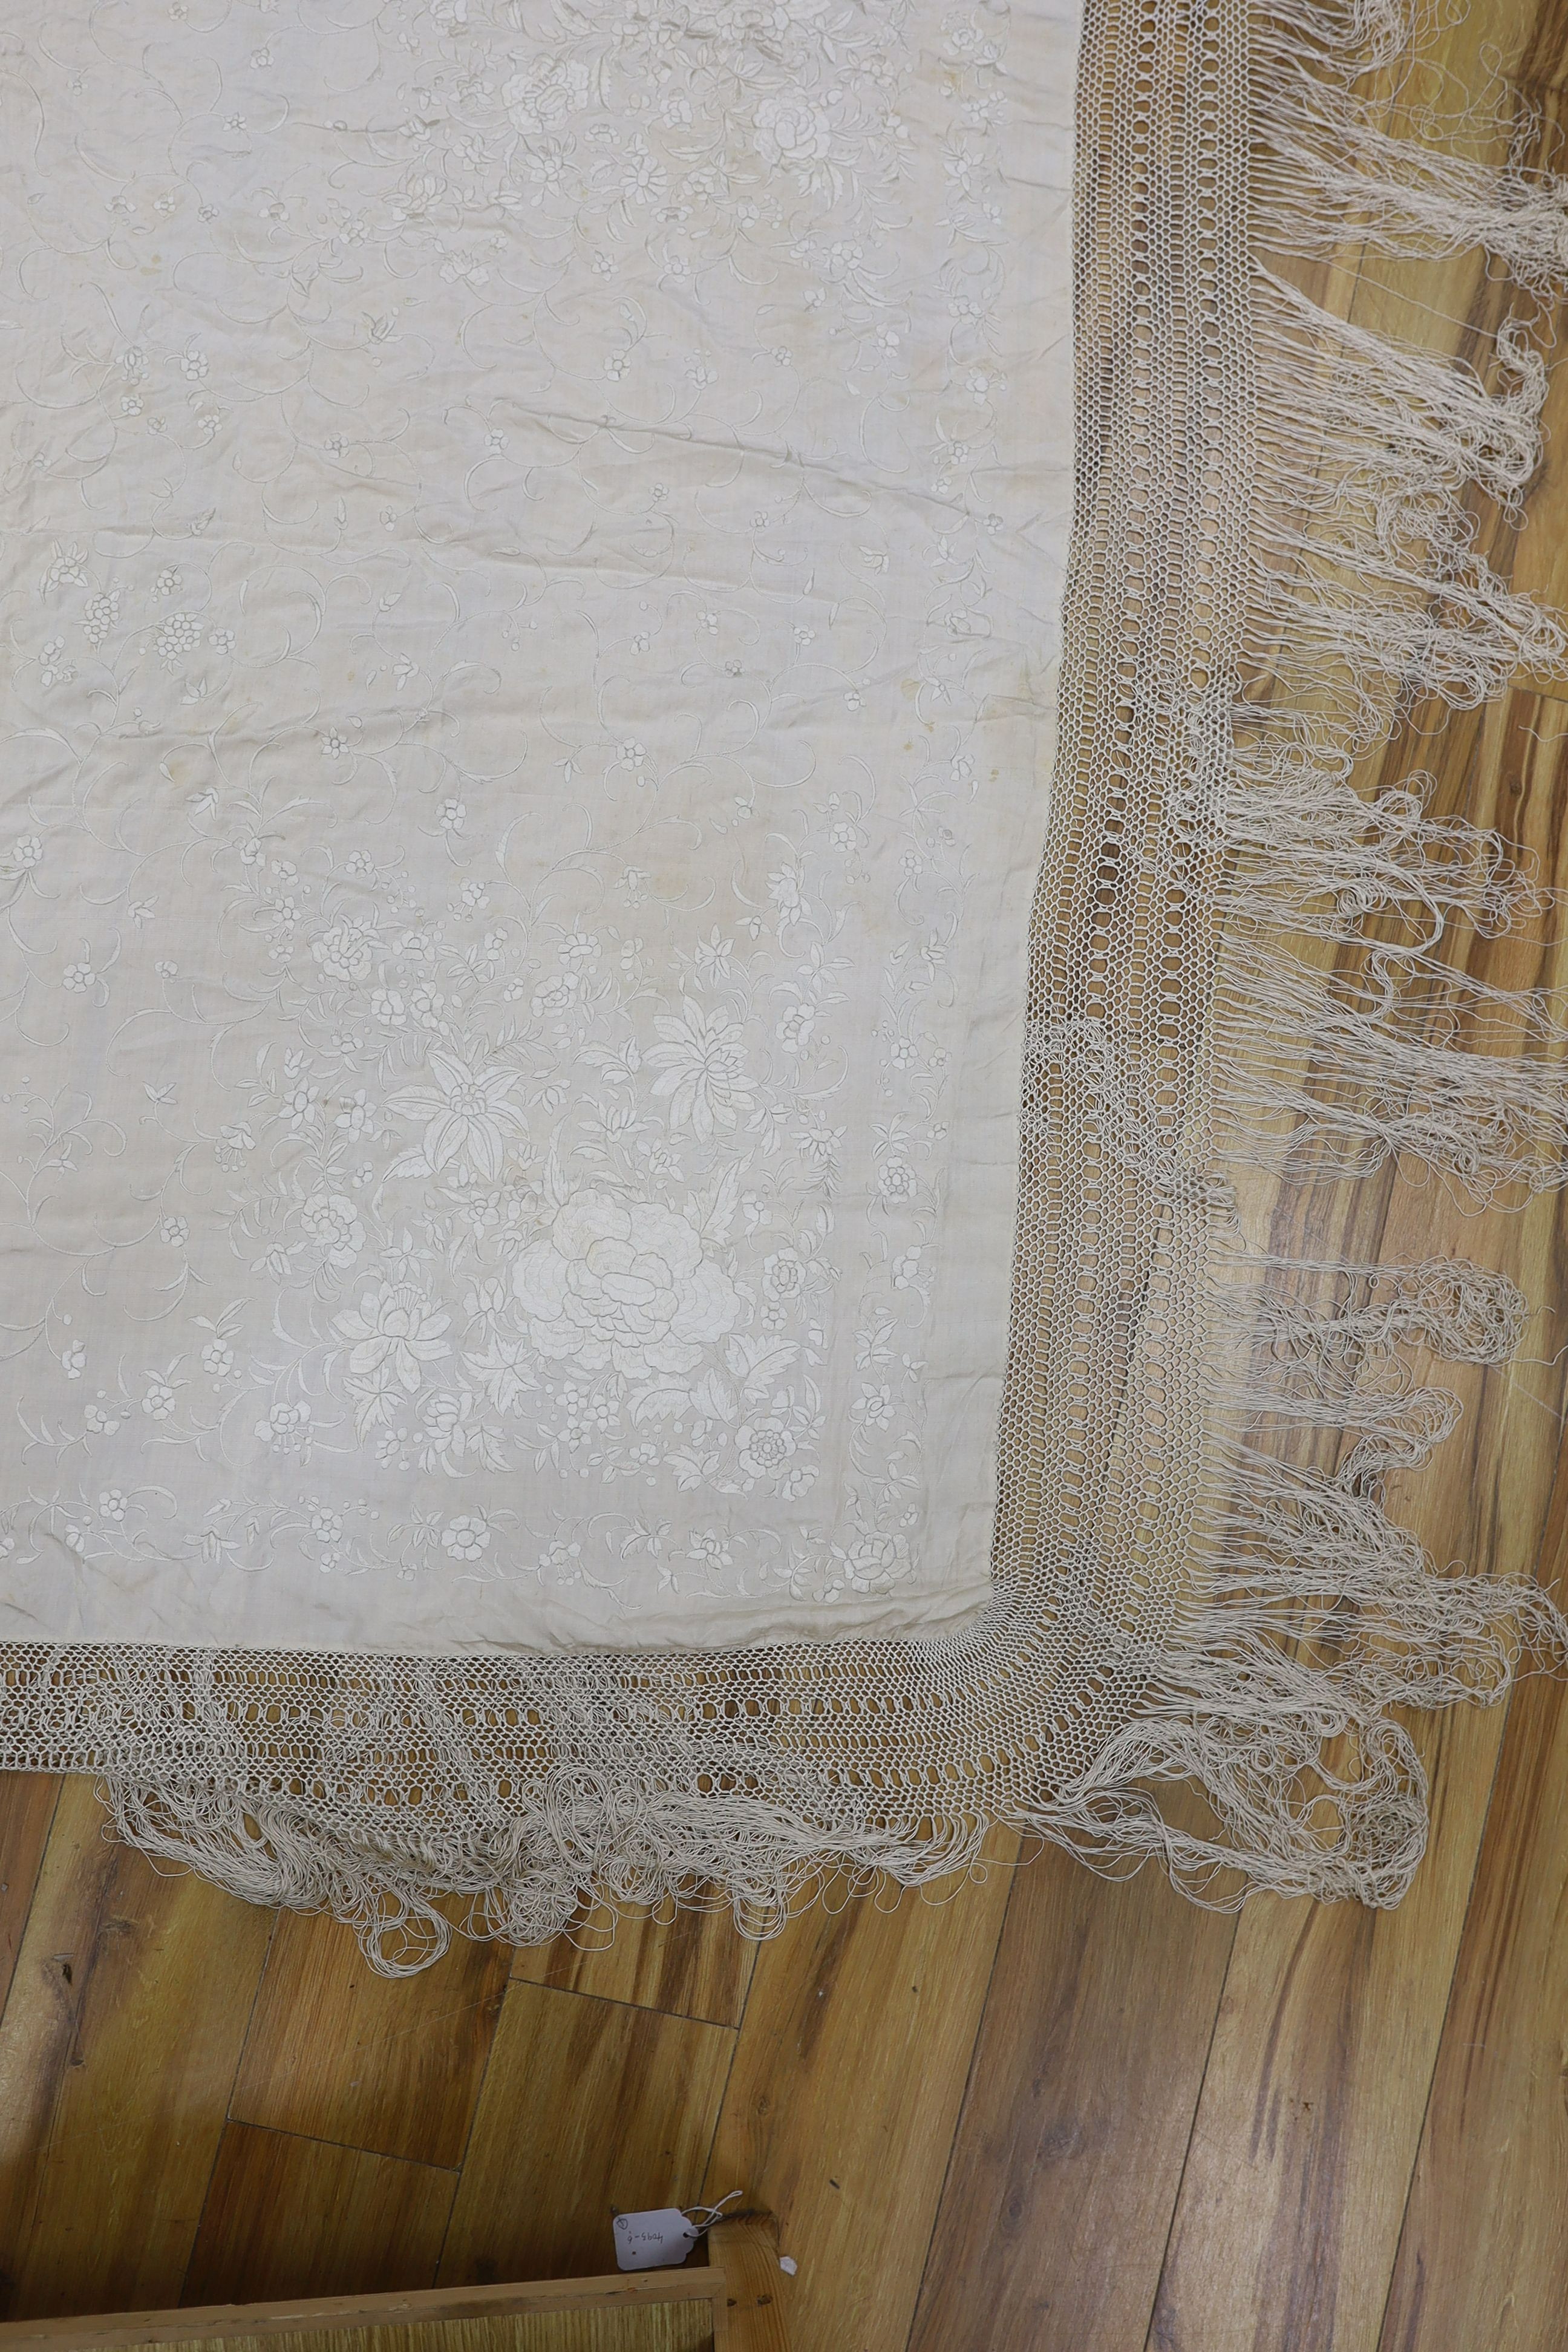 A 19th century cream embroidery on cream silk shawl together with a smaller later shawl